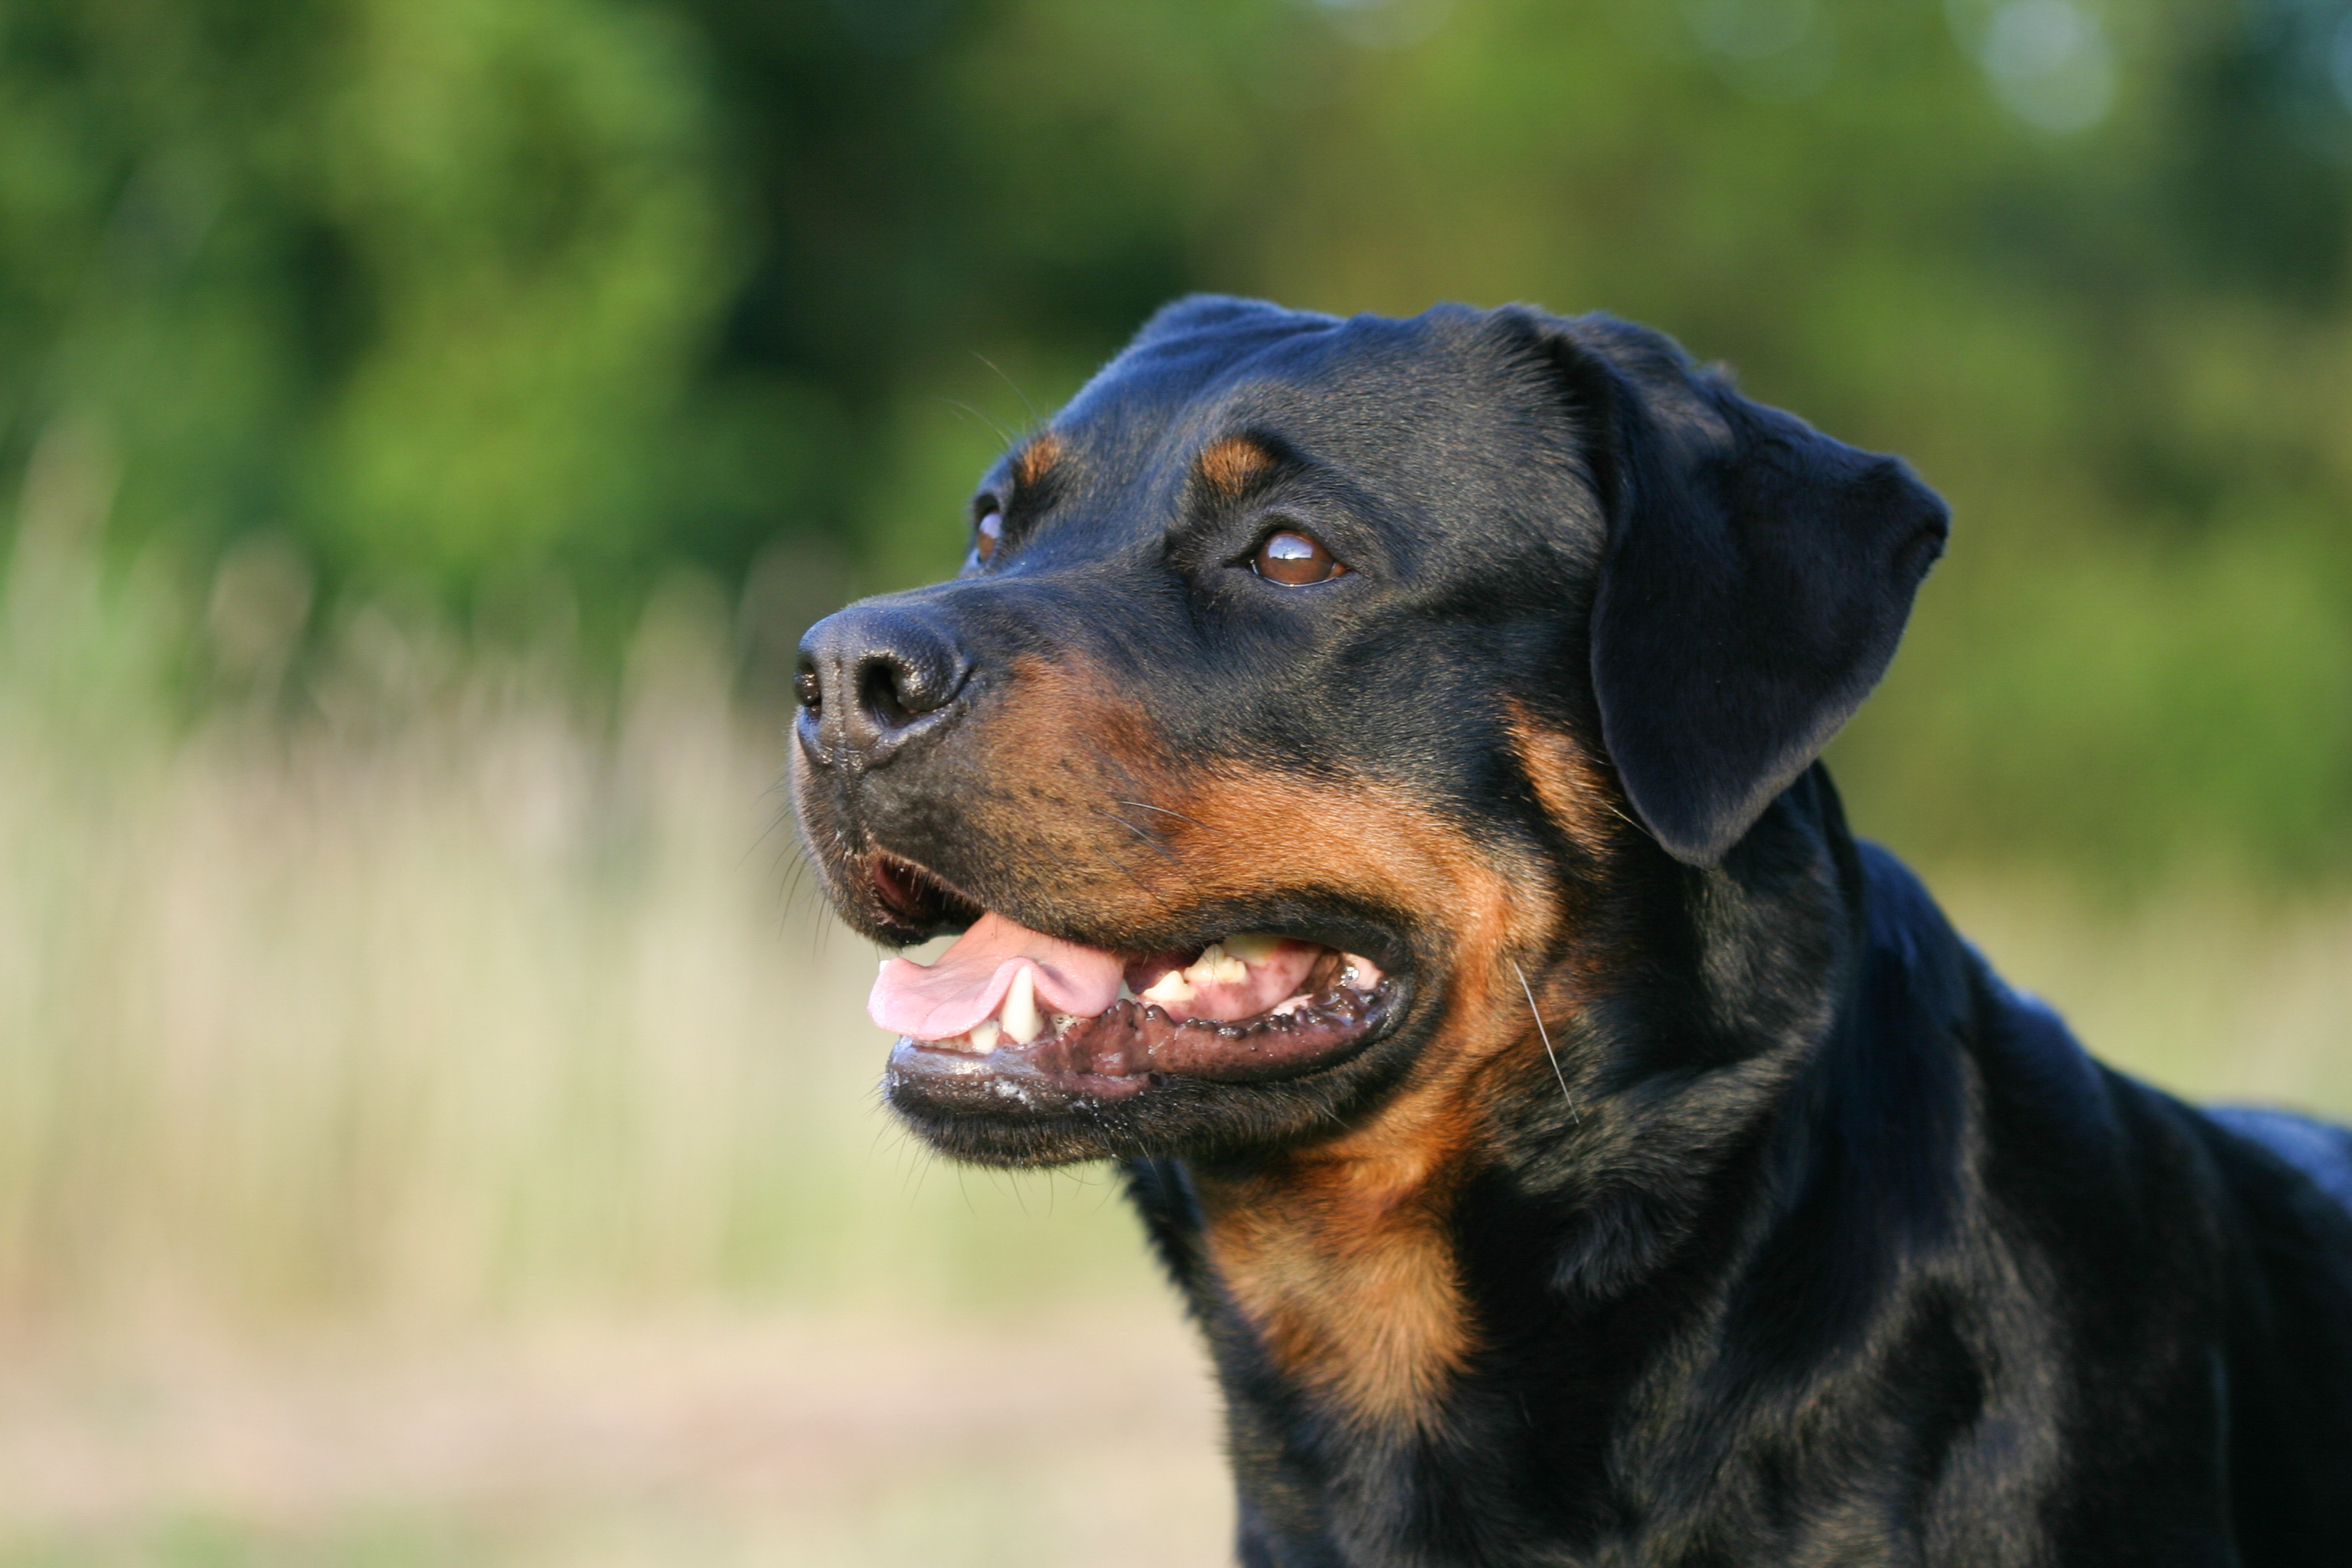 at what age should i start training my rottweiler puppy